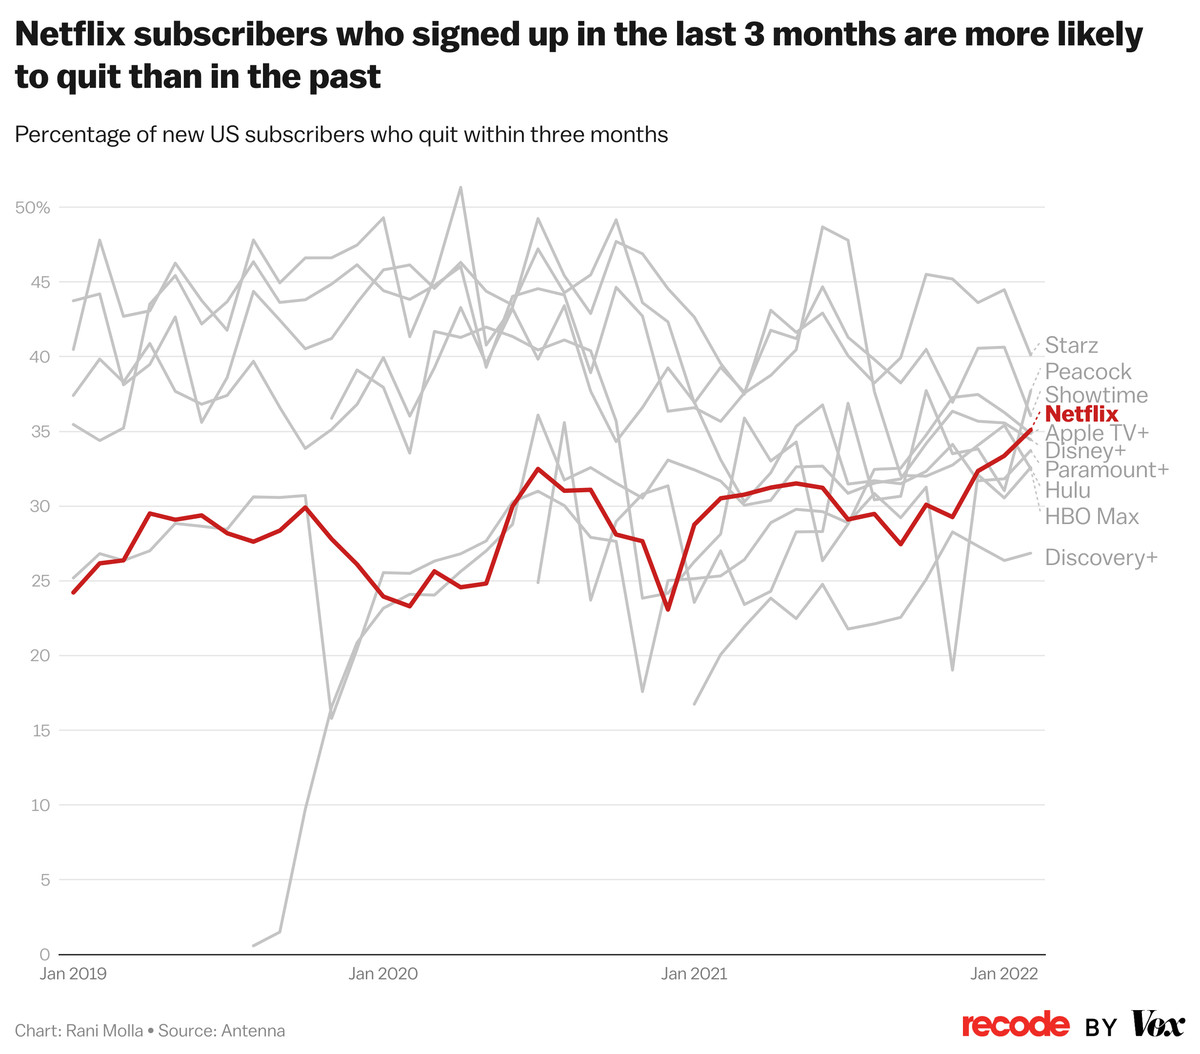 Netflix subscribers who have signed up in the last 3 months are more likely to unsubscribe than in the past 